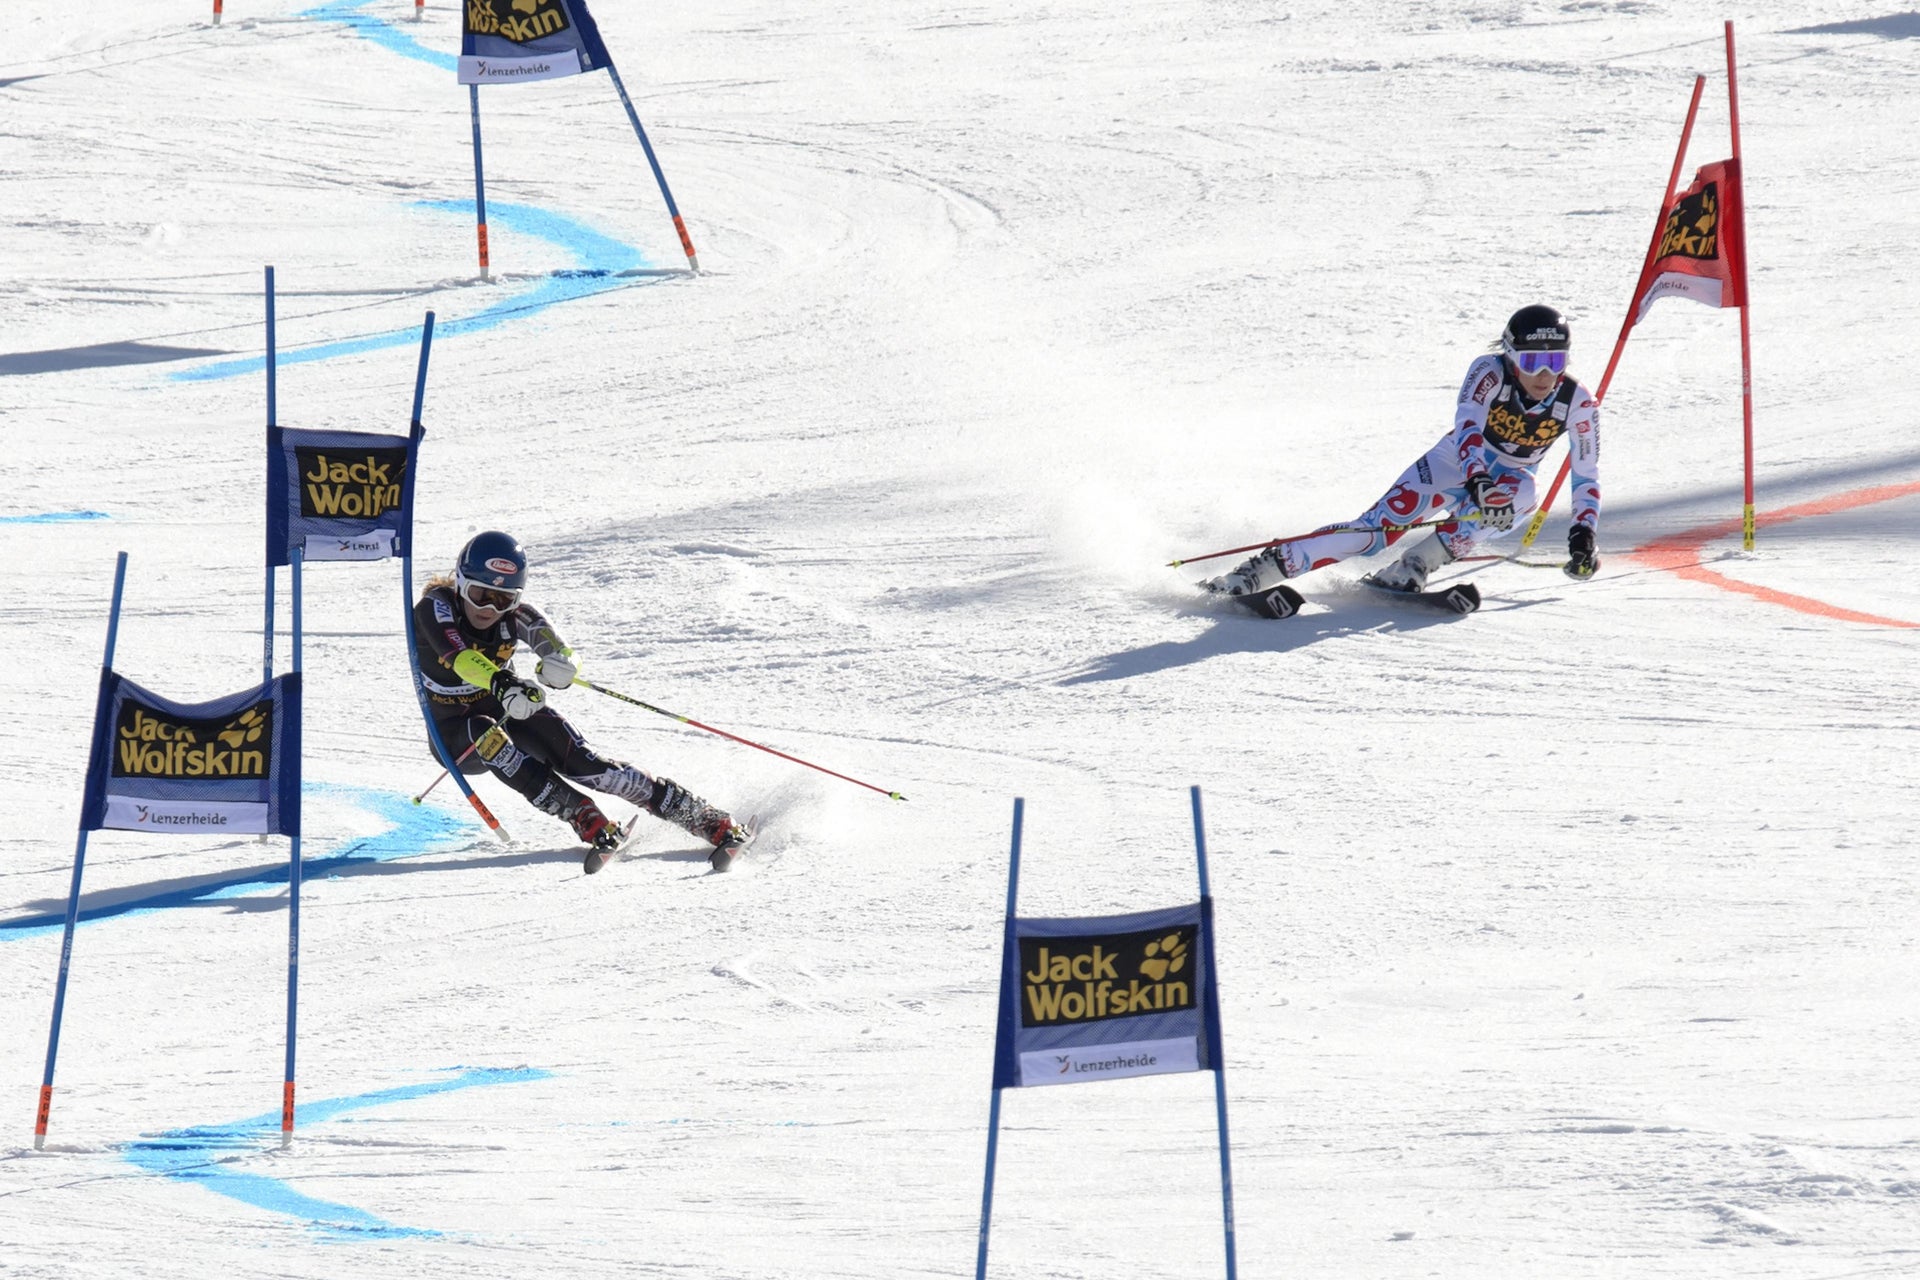 Get to know the new Olympic event of mixed team alpine skiing.